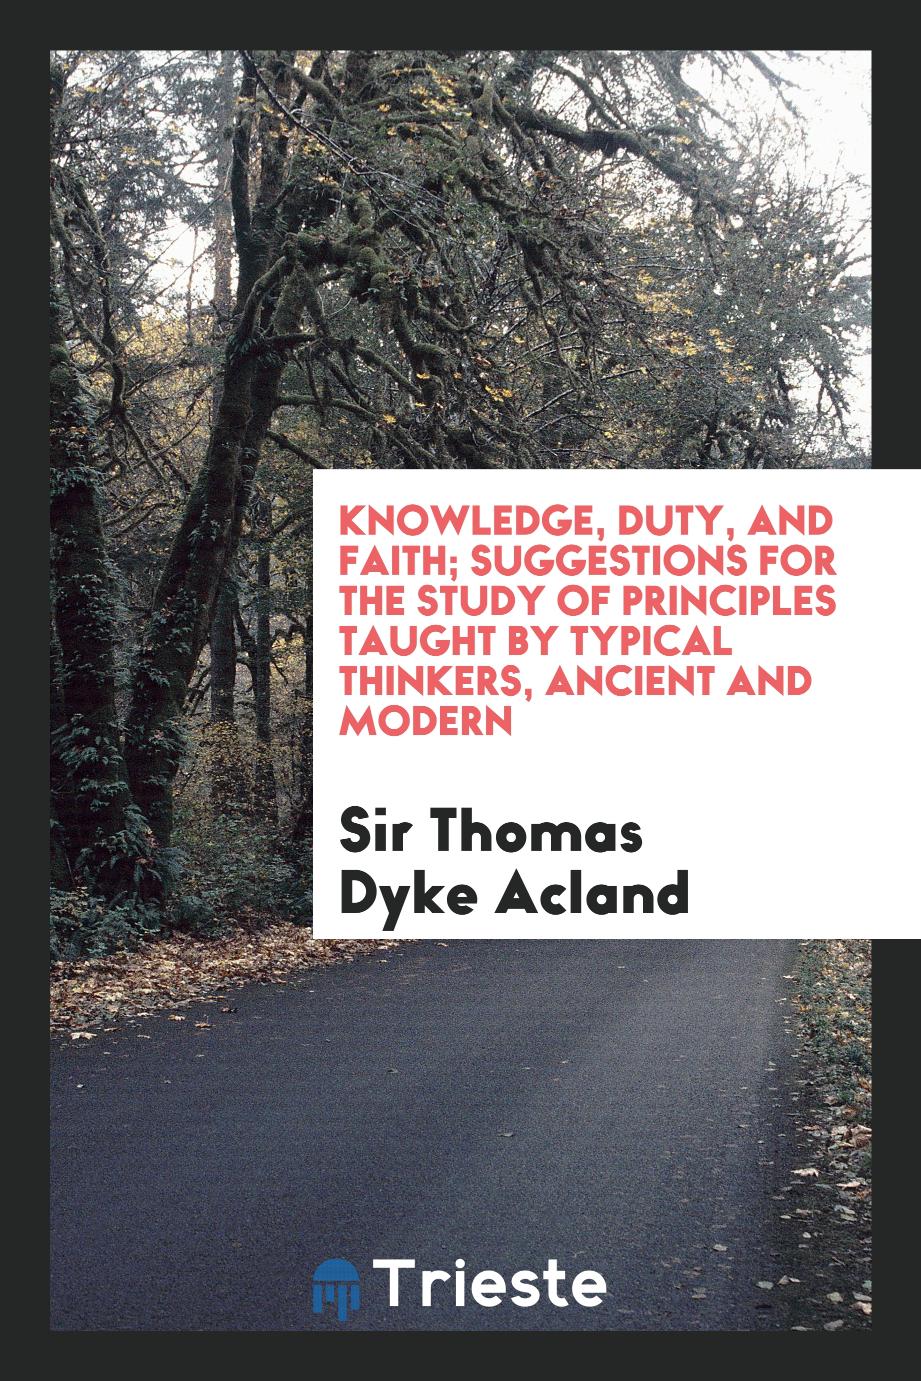 Knowledge, duty, and faith; suggestions for the study of principles taught by typical thinkers, ancient and modern